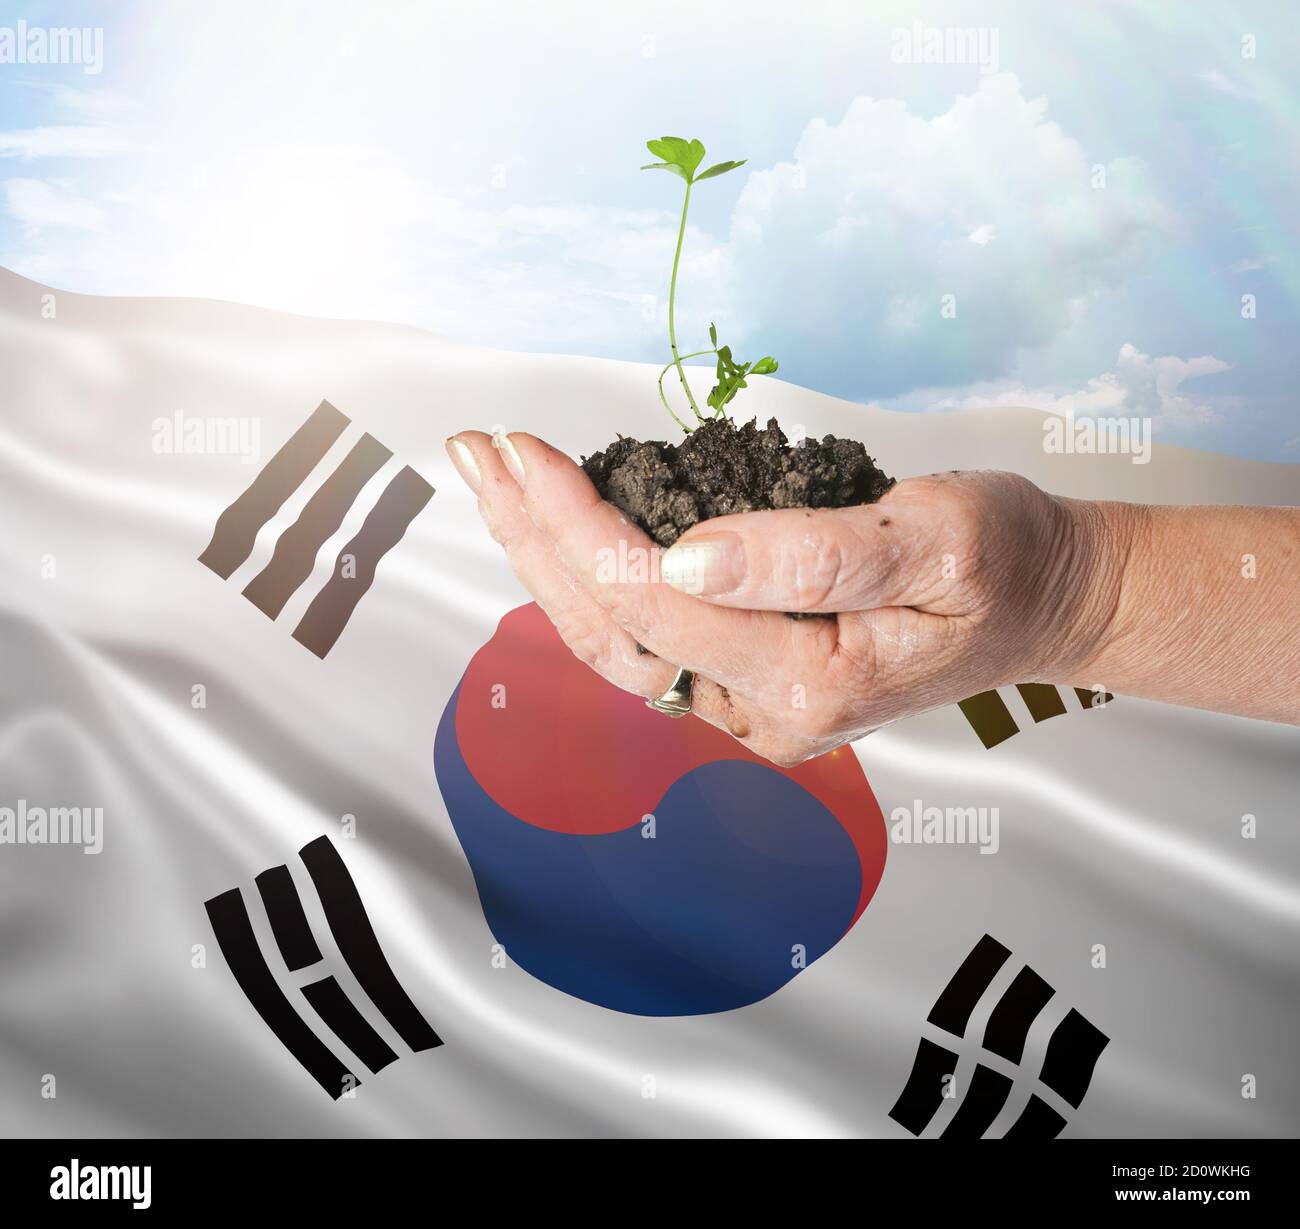 South Korea growth and new beginning. Green renewable energy and ecology concept. Hand holding young plant. Stock Photo